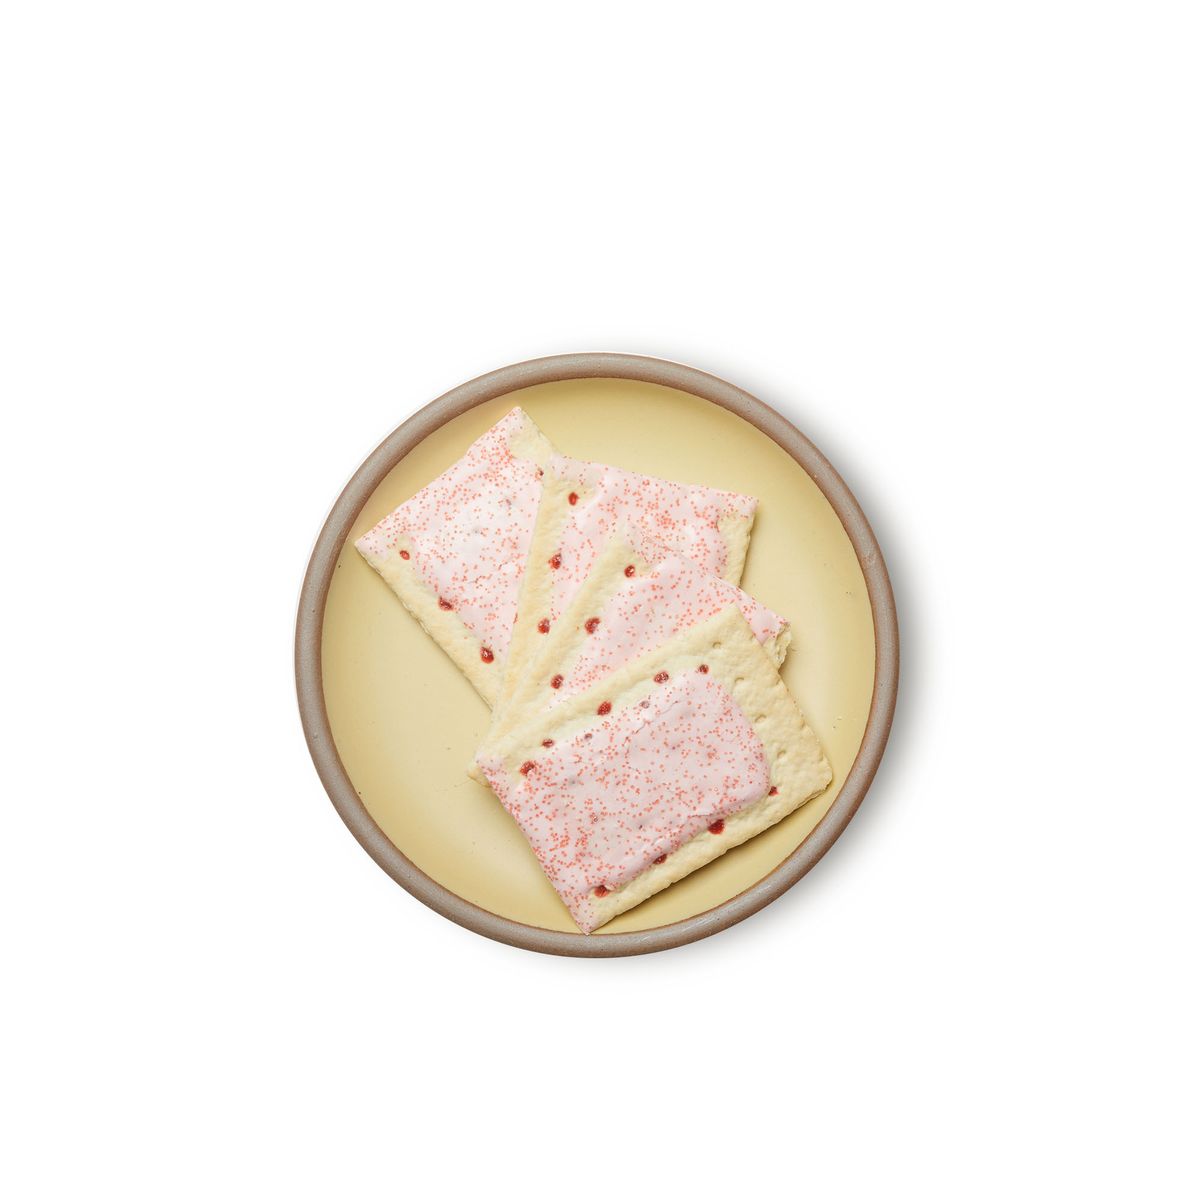 Pop-tarts on a medium sized ceramic plate in a light butter yellow color featuring iron speckles and an unglazed rim